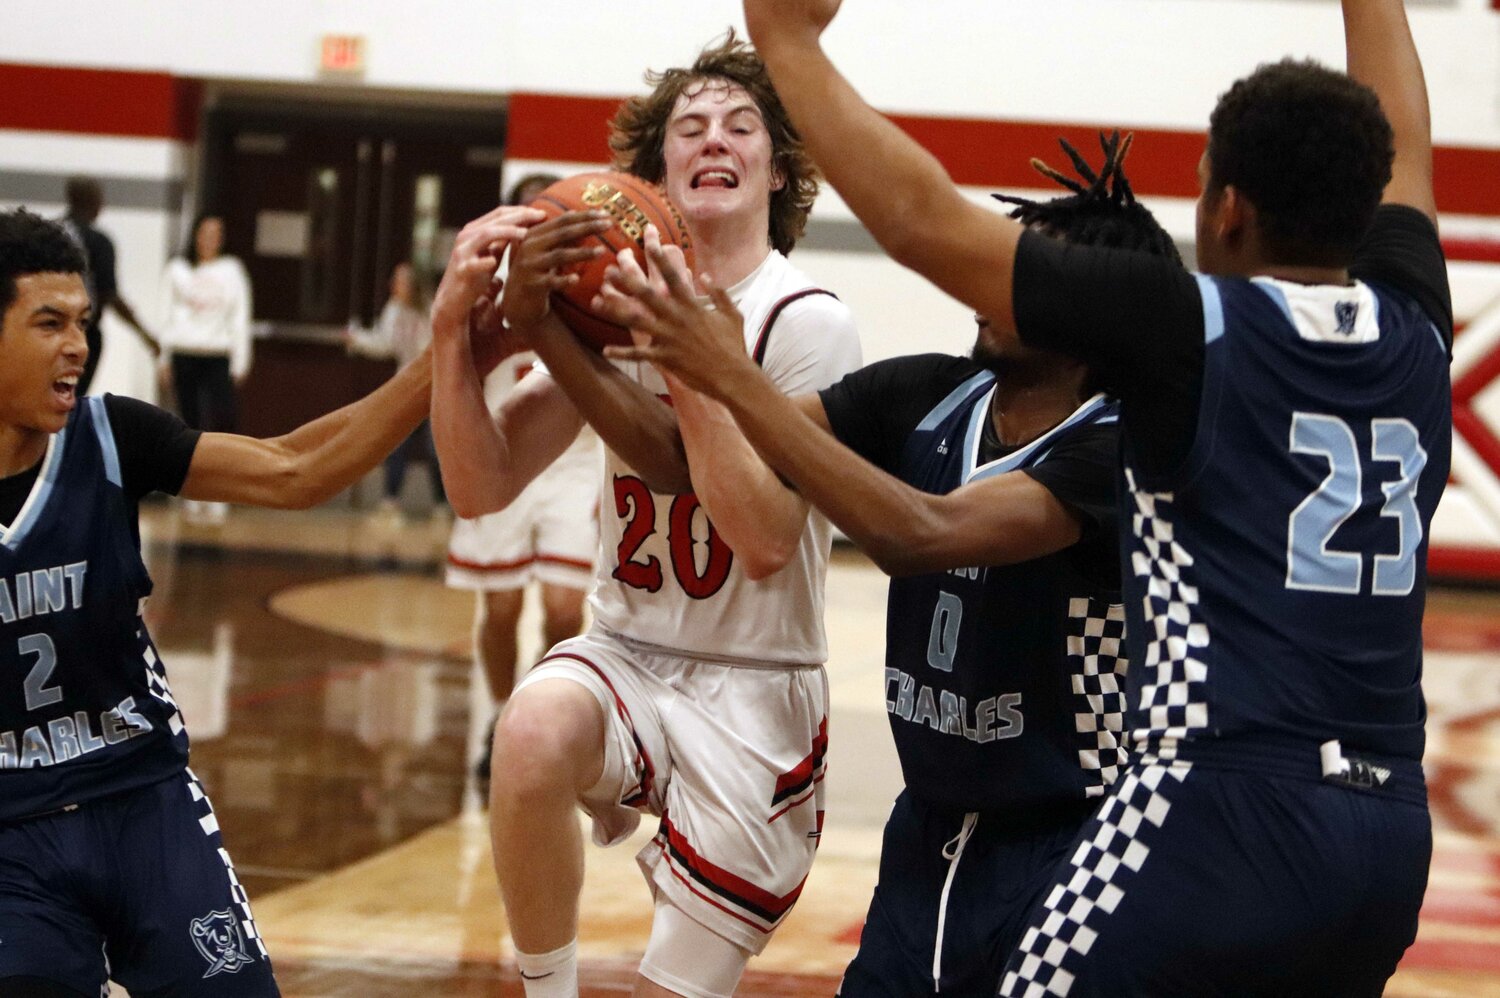 Warrenton senior Troy Anderson is fouled as he drives to the basket during the first half of Warrenton’s 75-55 loss to St. Charles. Anderson scored 24 points in Warrenton’s GAC North loss.